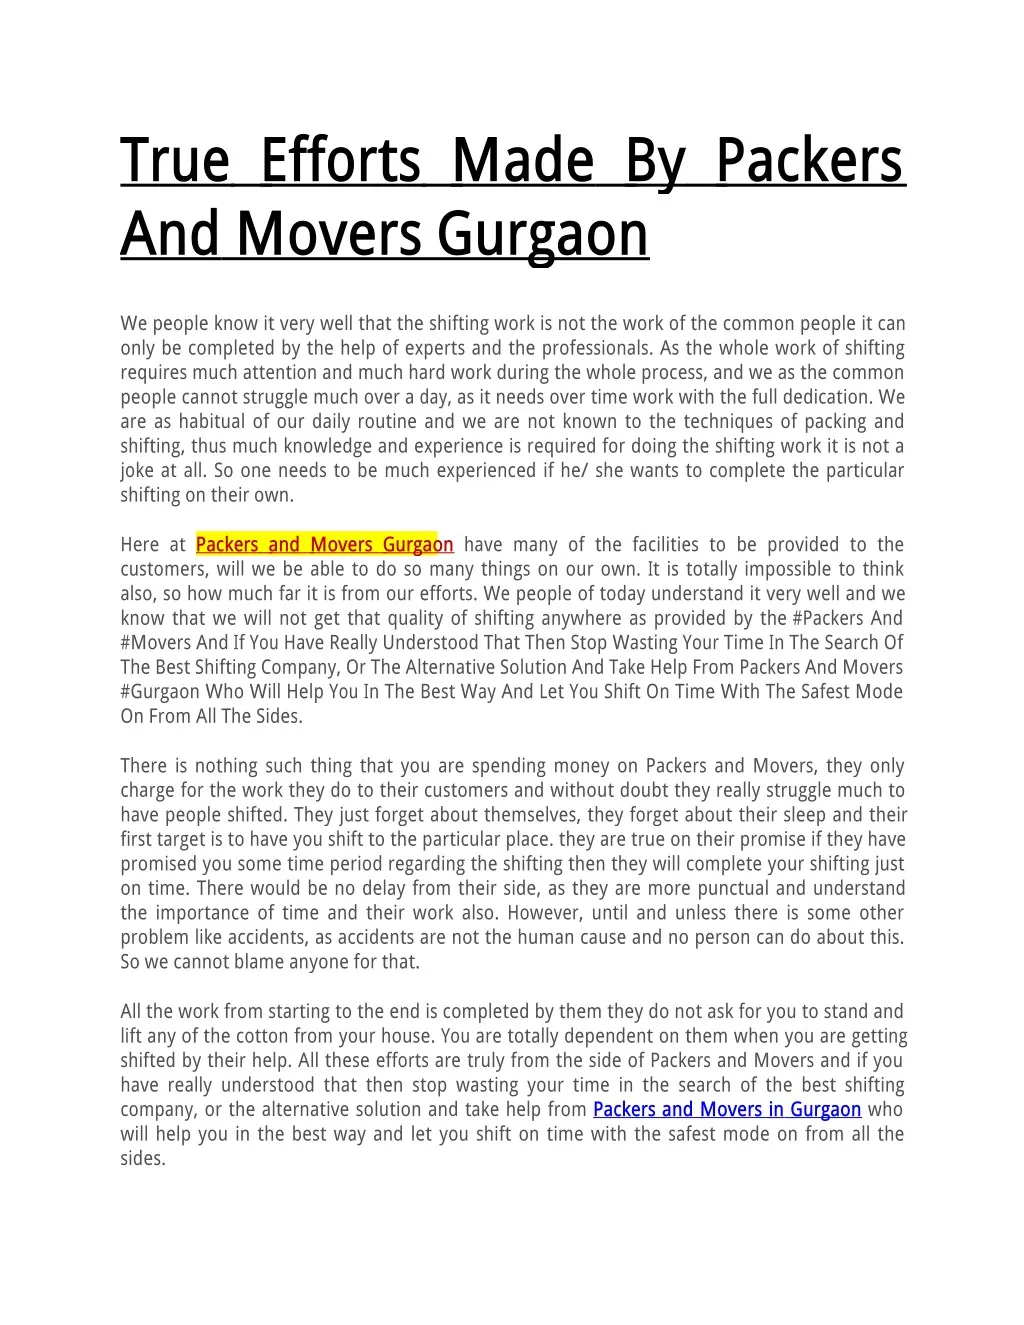 true efforts made by packers and movers gurgaon